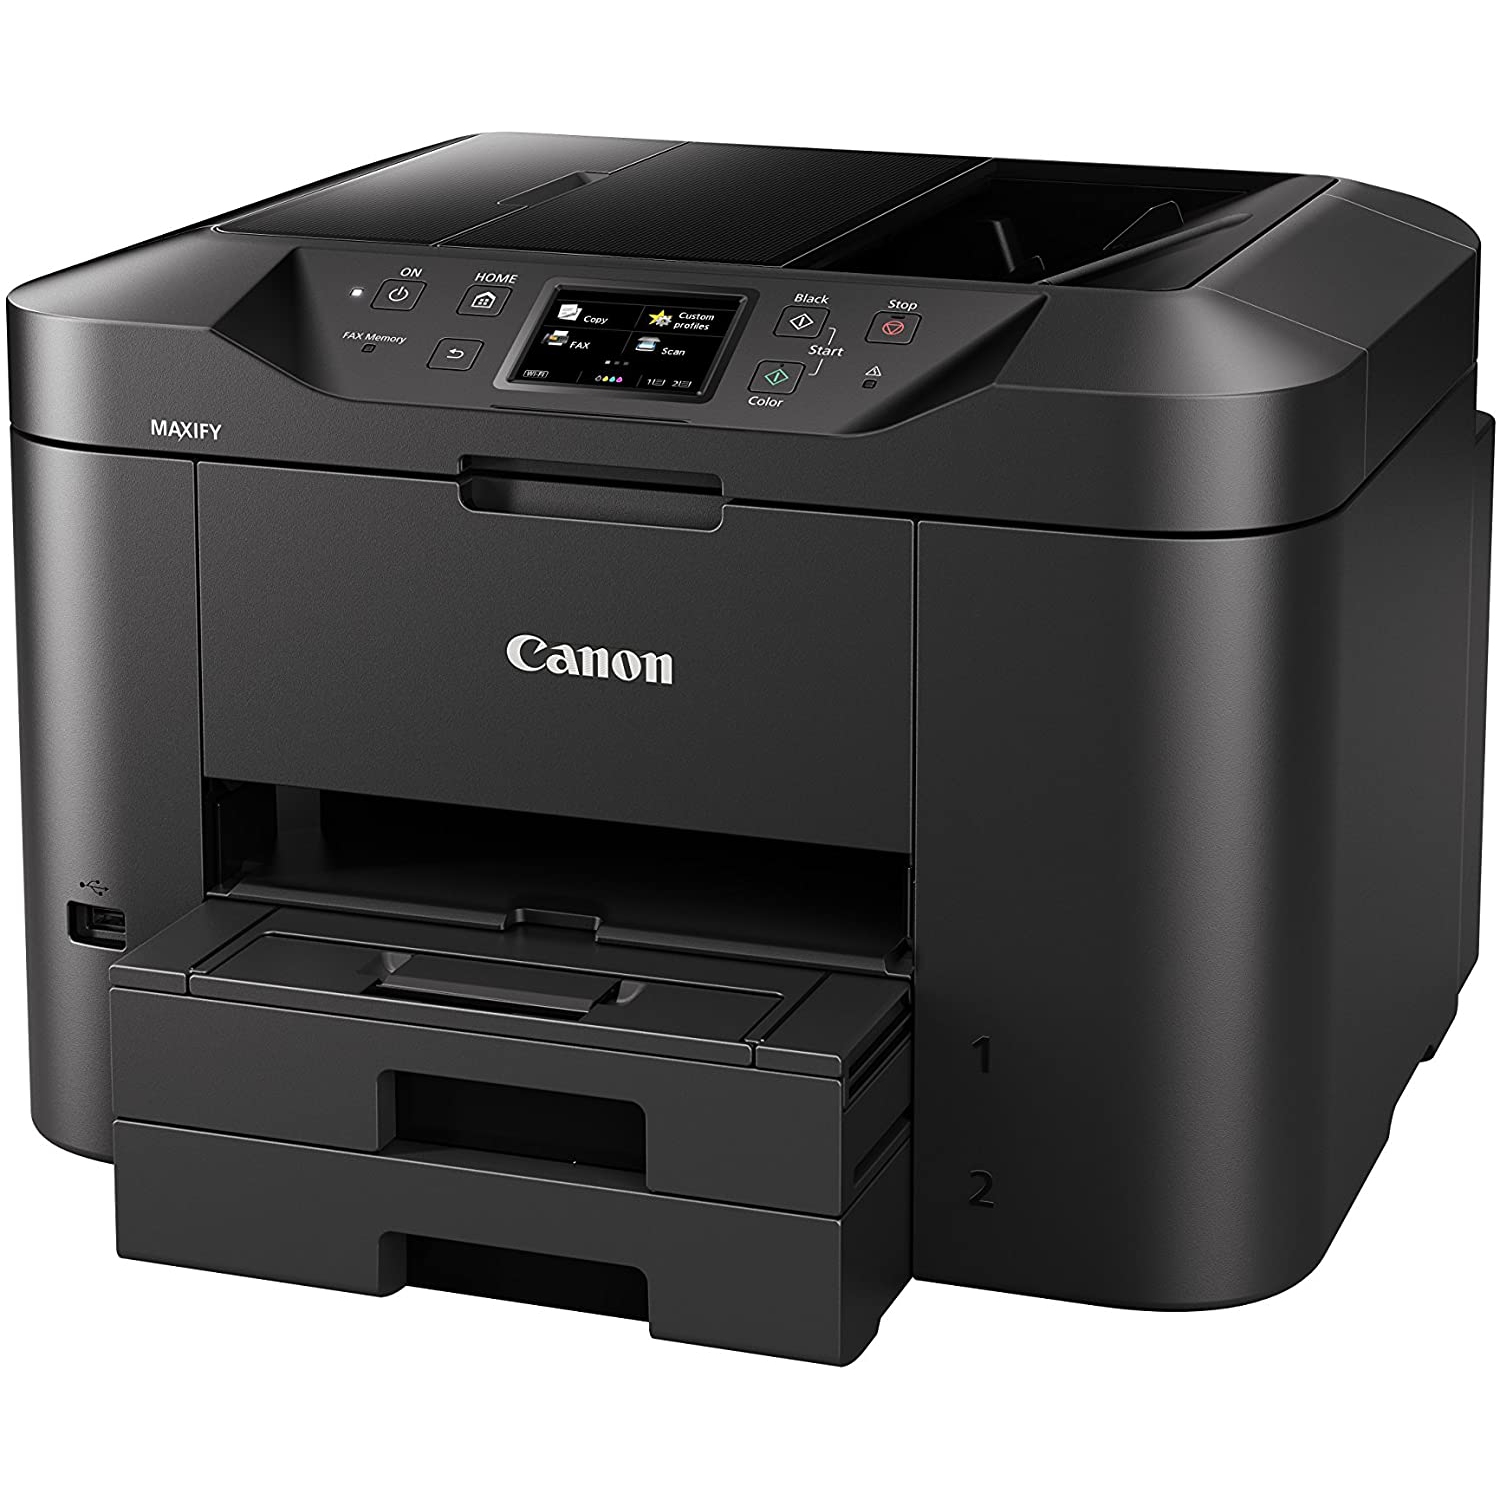 Canon Maxify MB2720 Wireless Colour Printer with Scanner Copier & Fax Black - Refurbished